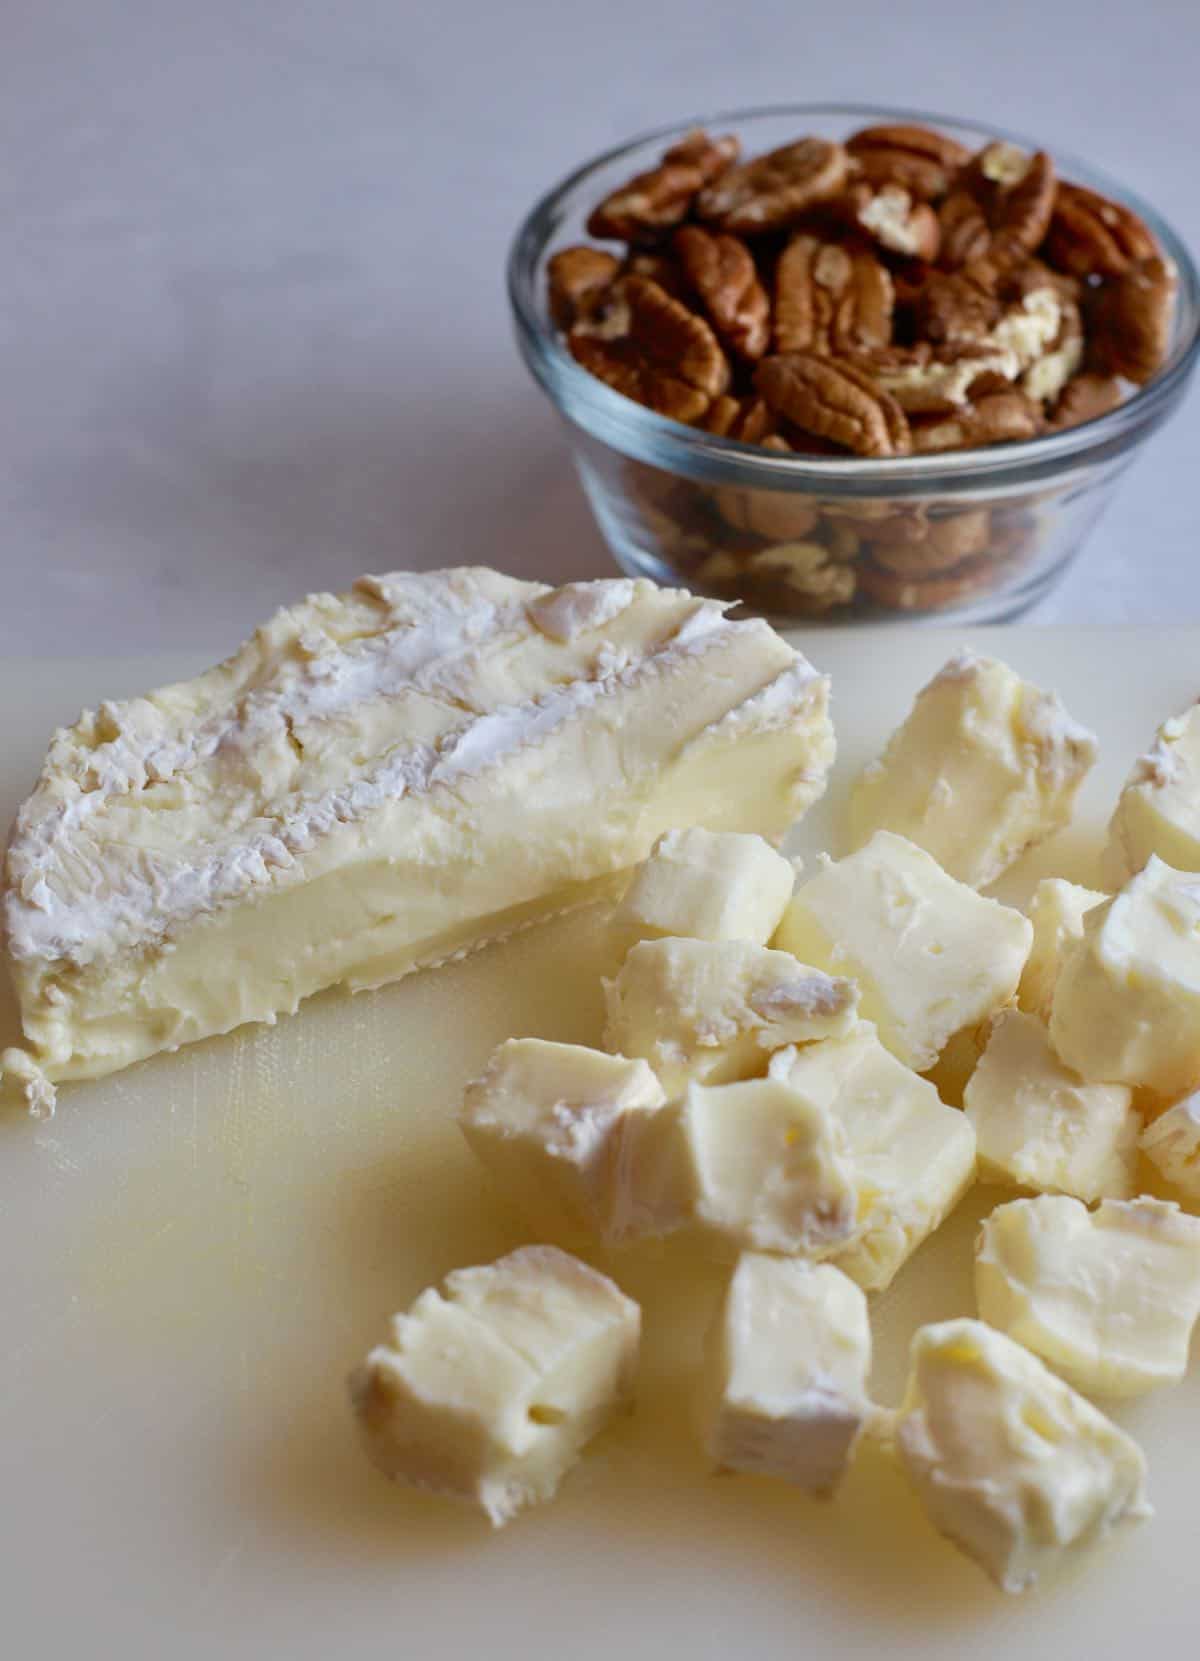 A wheel of brie cheese cut into cubes. 